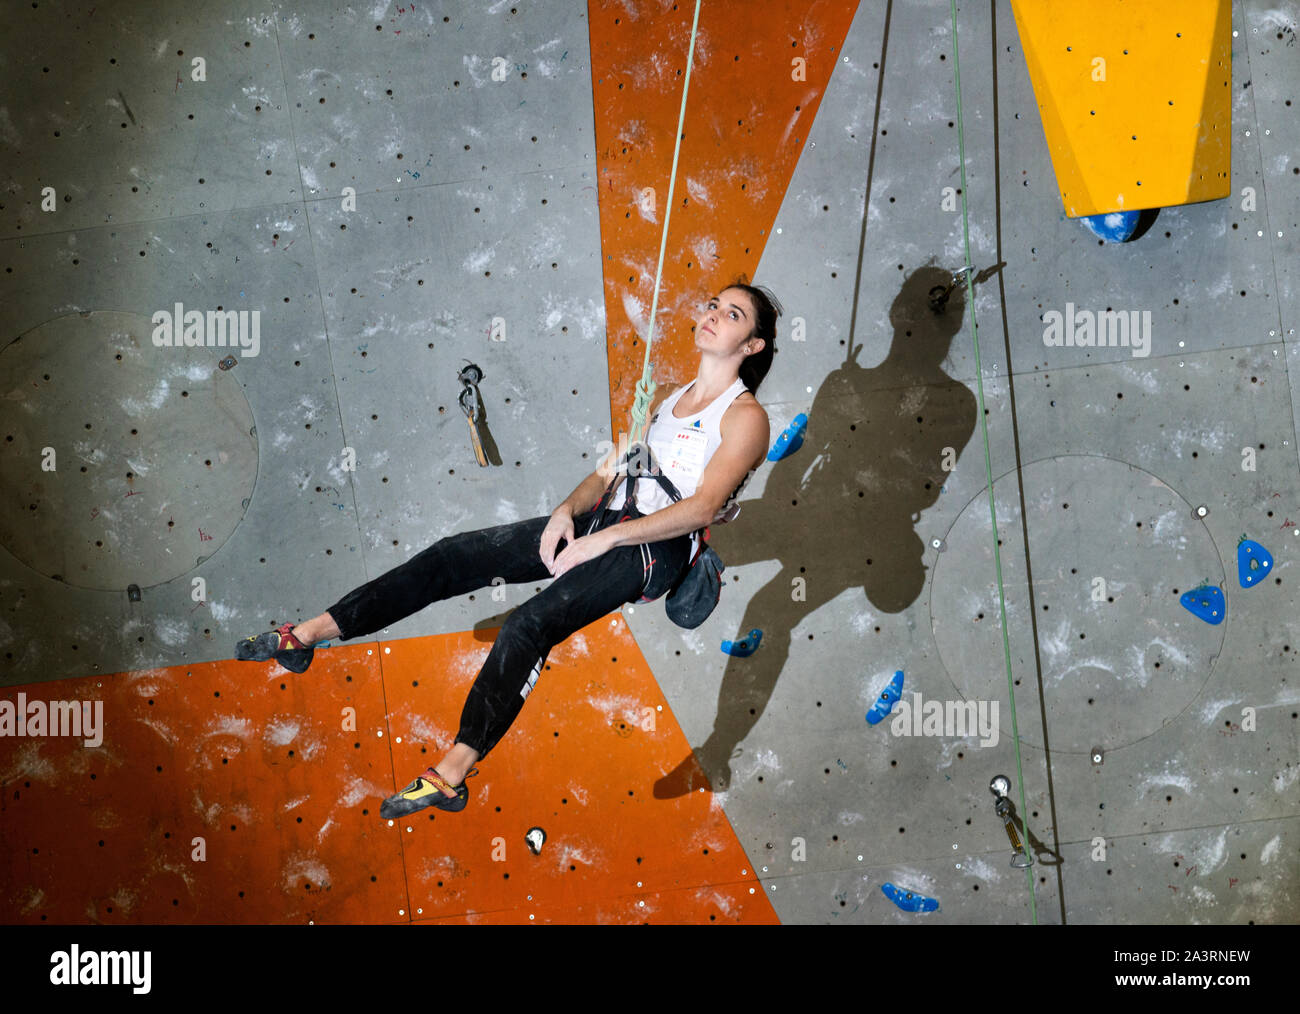 Mia Krampl of Slovenia competes in the Lead climbing womans Final on at the IFSC Climbing World Championships at the Edinburgh International Climbing Stock Photo